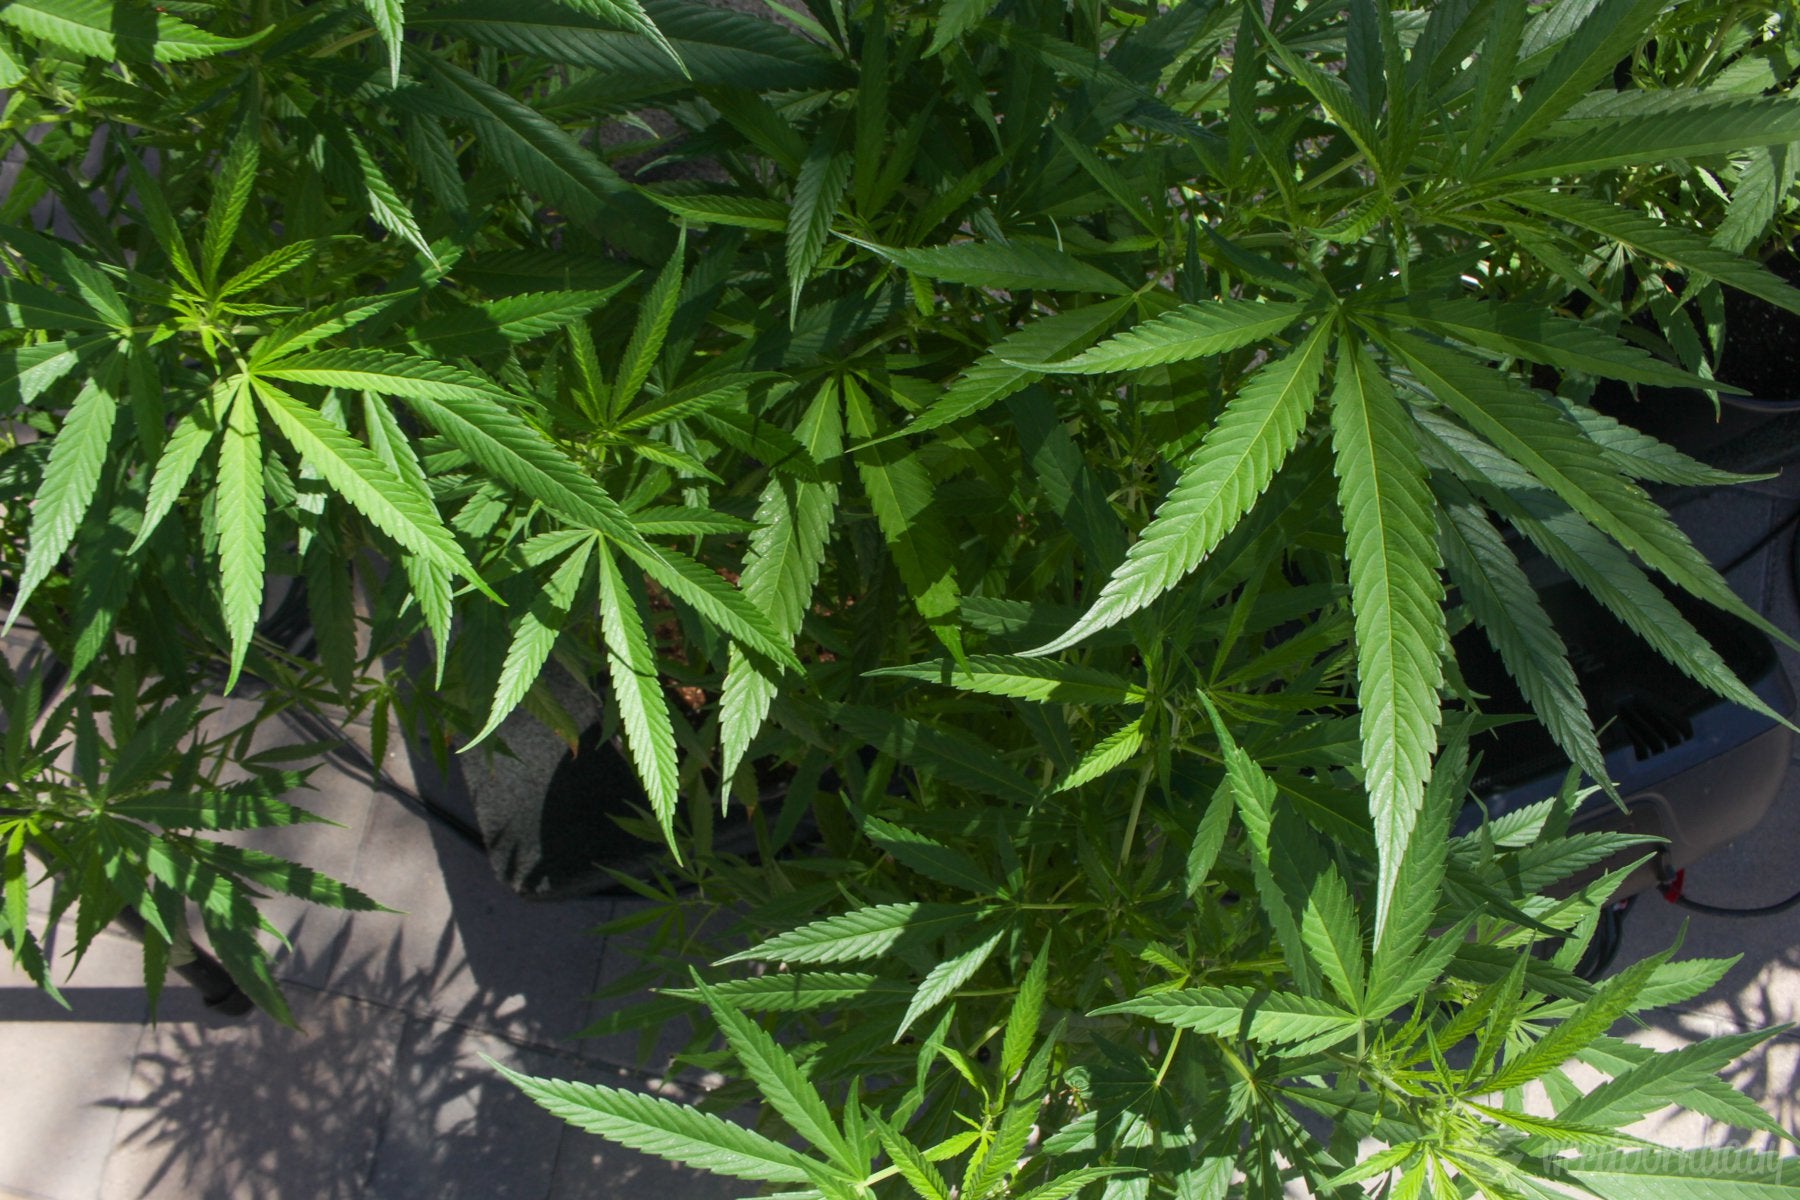 D.C. Council Passes Emergency Bill To Protect Some—But Not All—City Workers Who Use Medical Marijuana